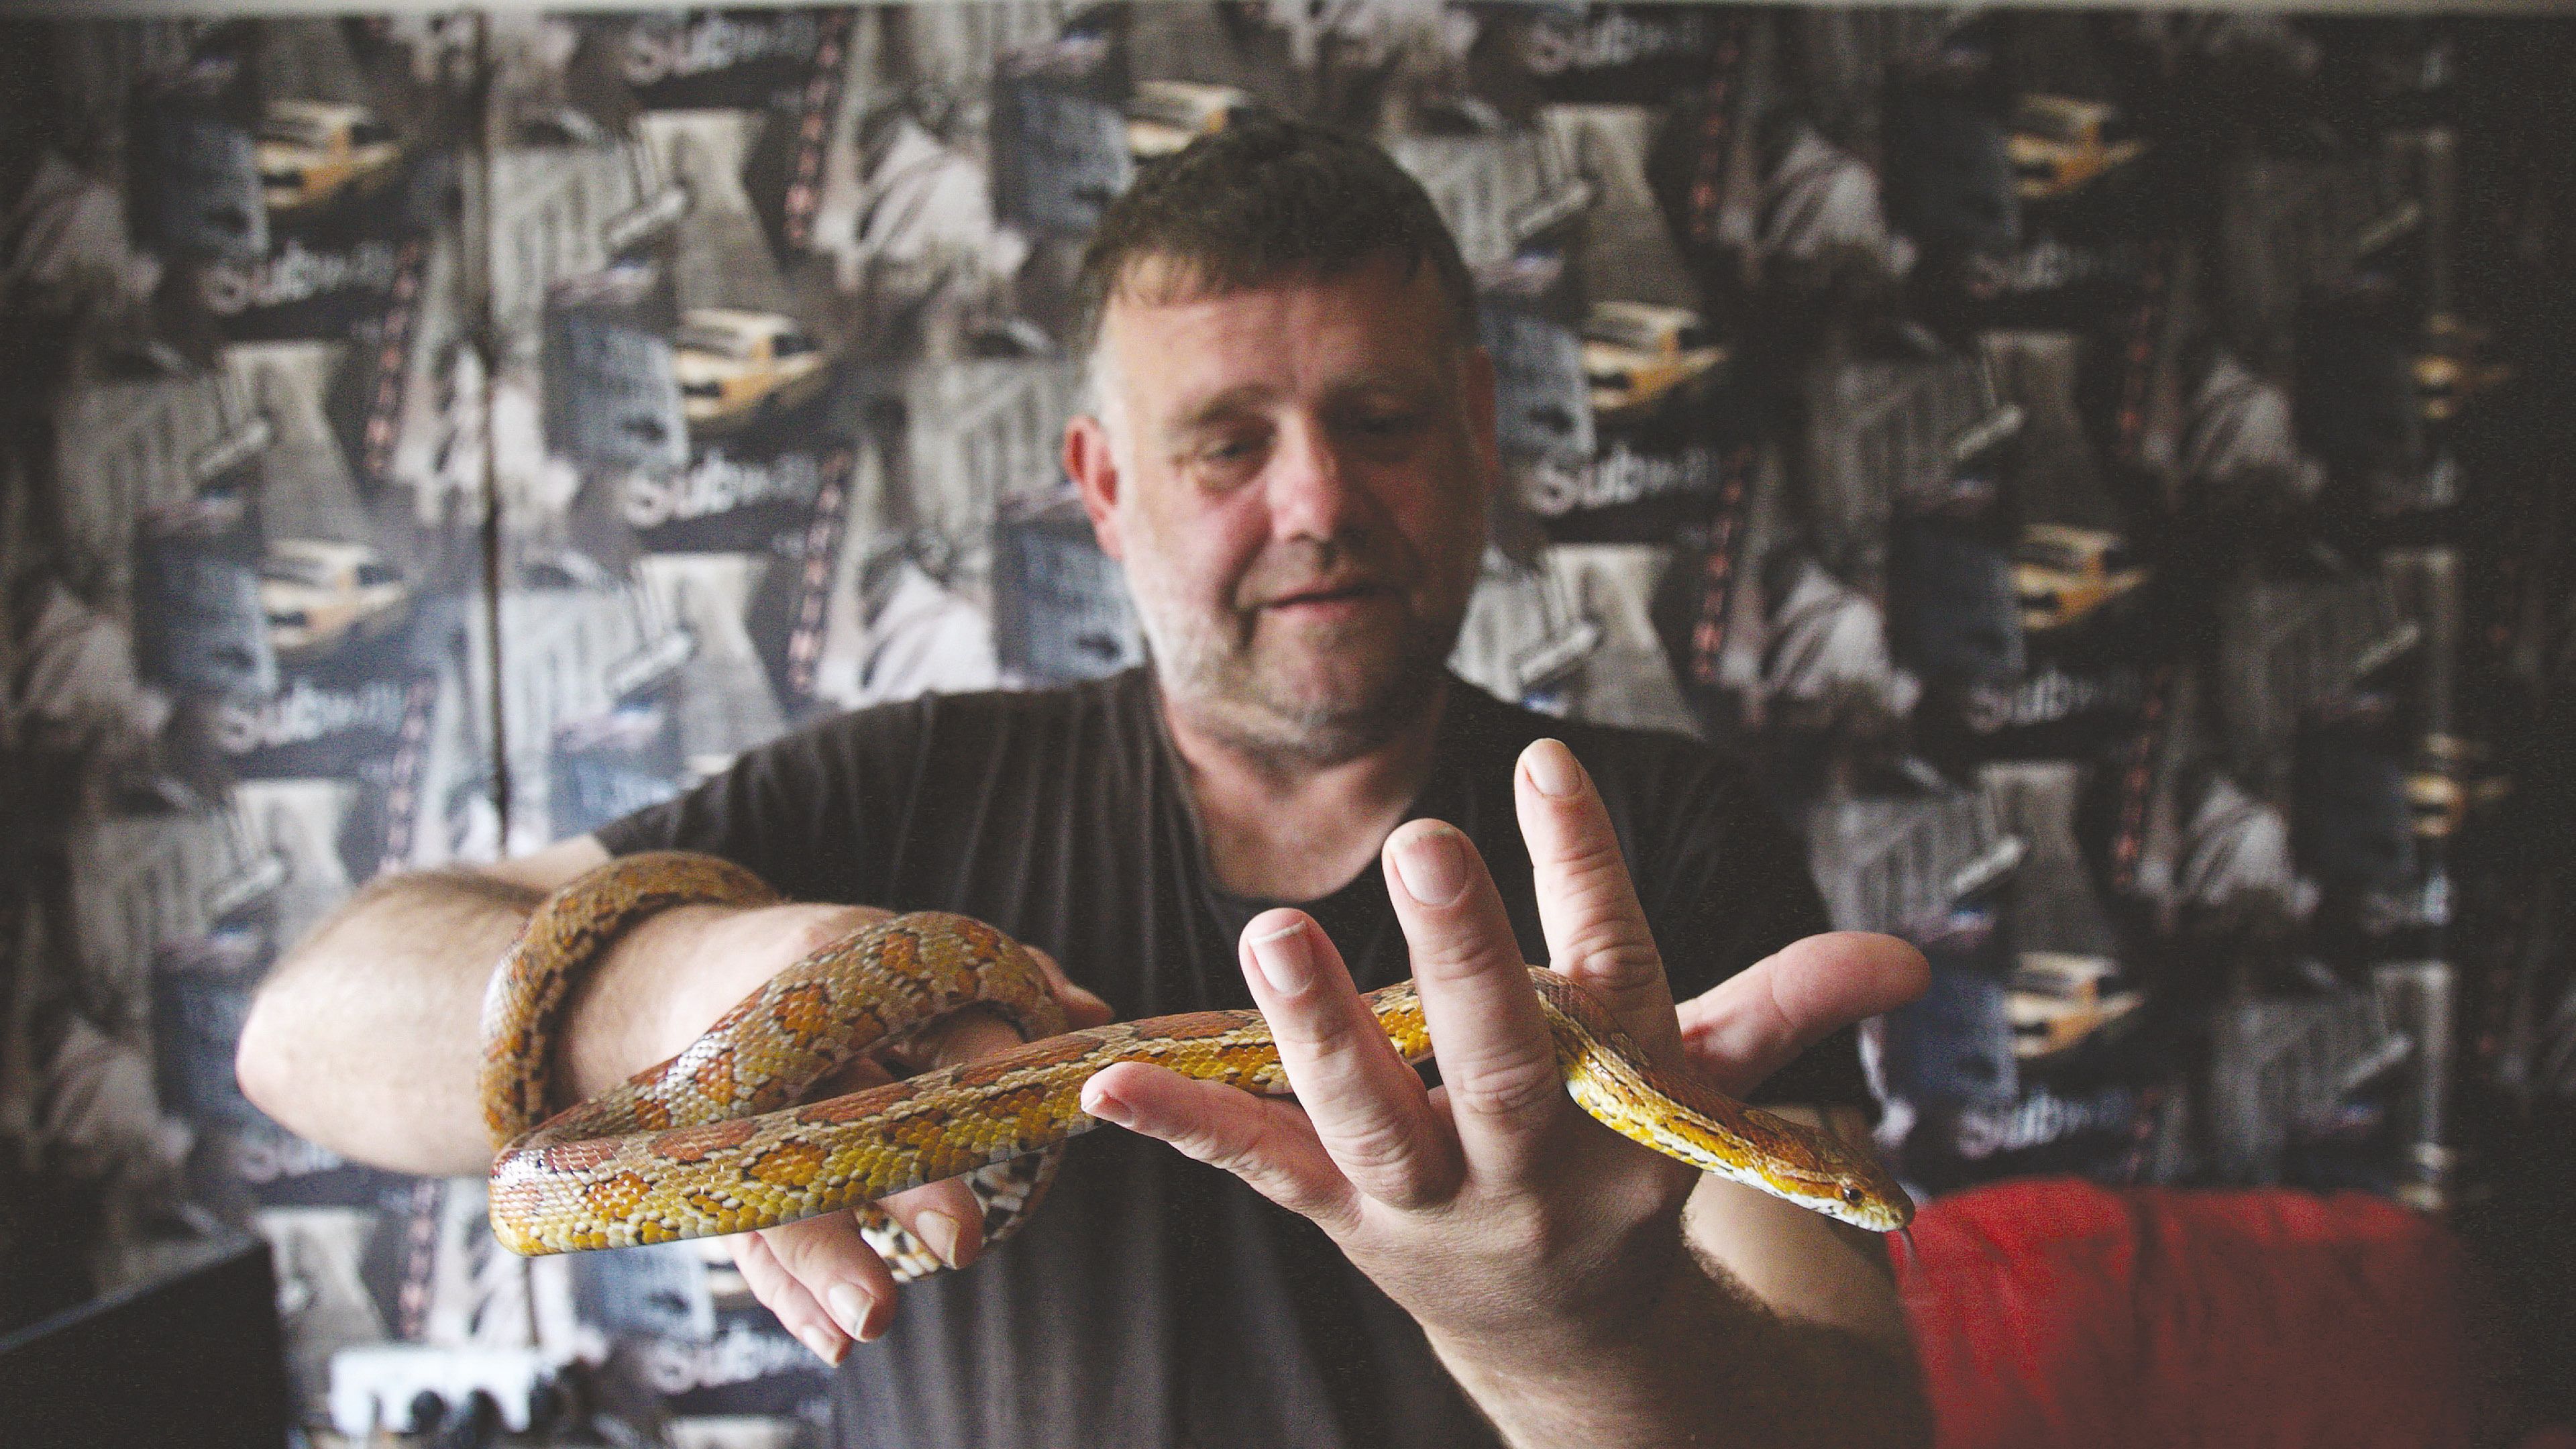 Photo of person with a snake from the Paige book